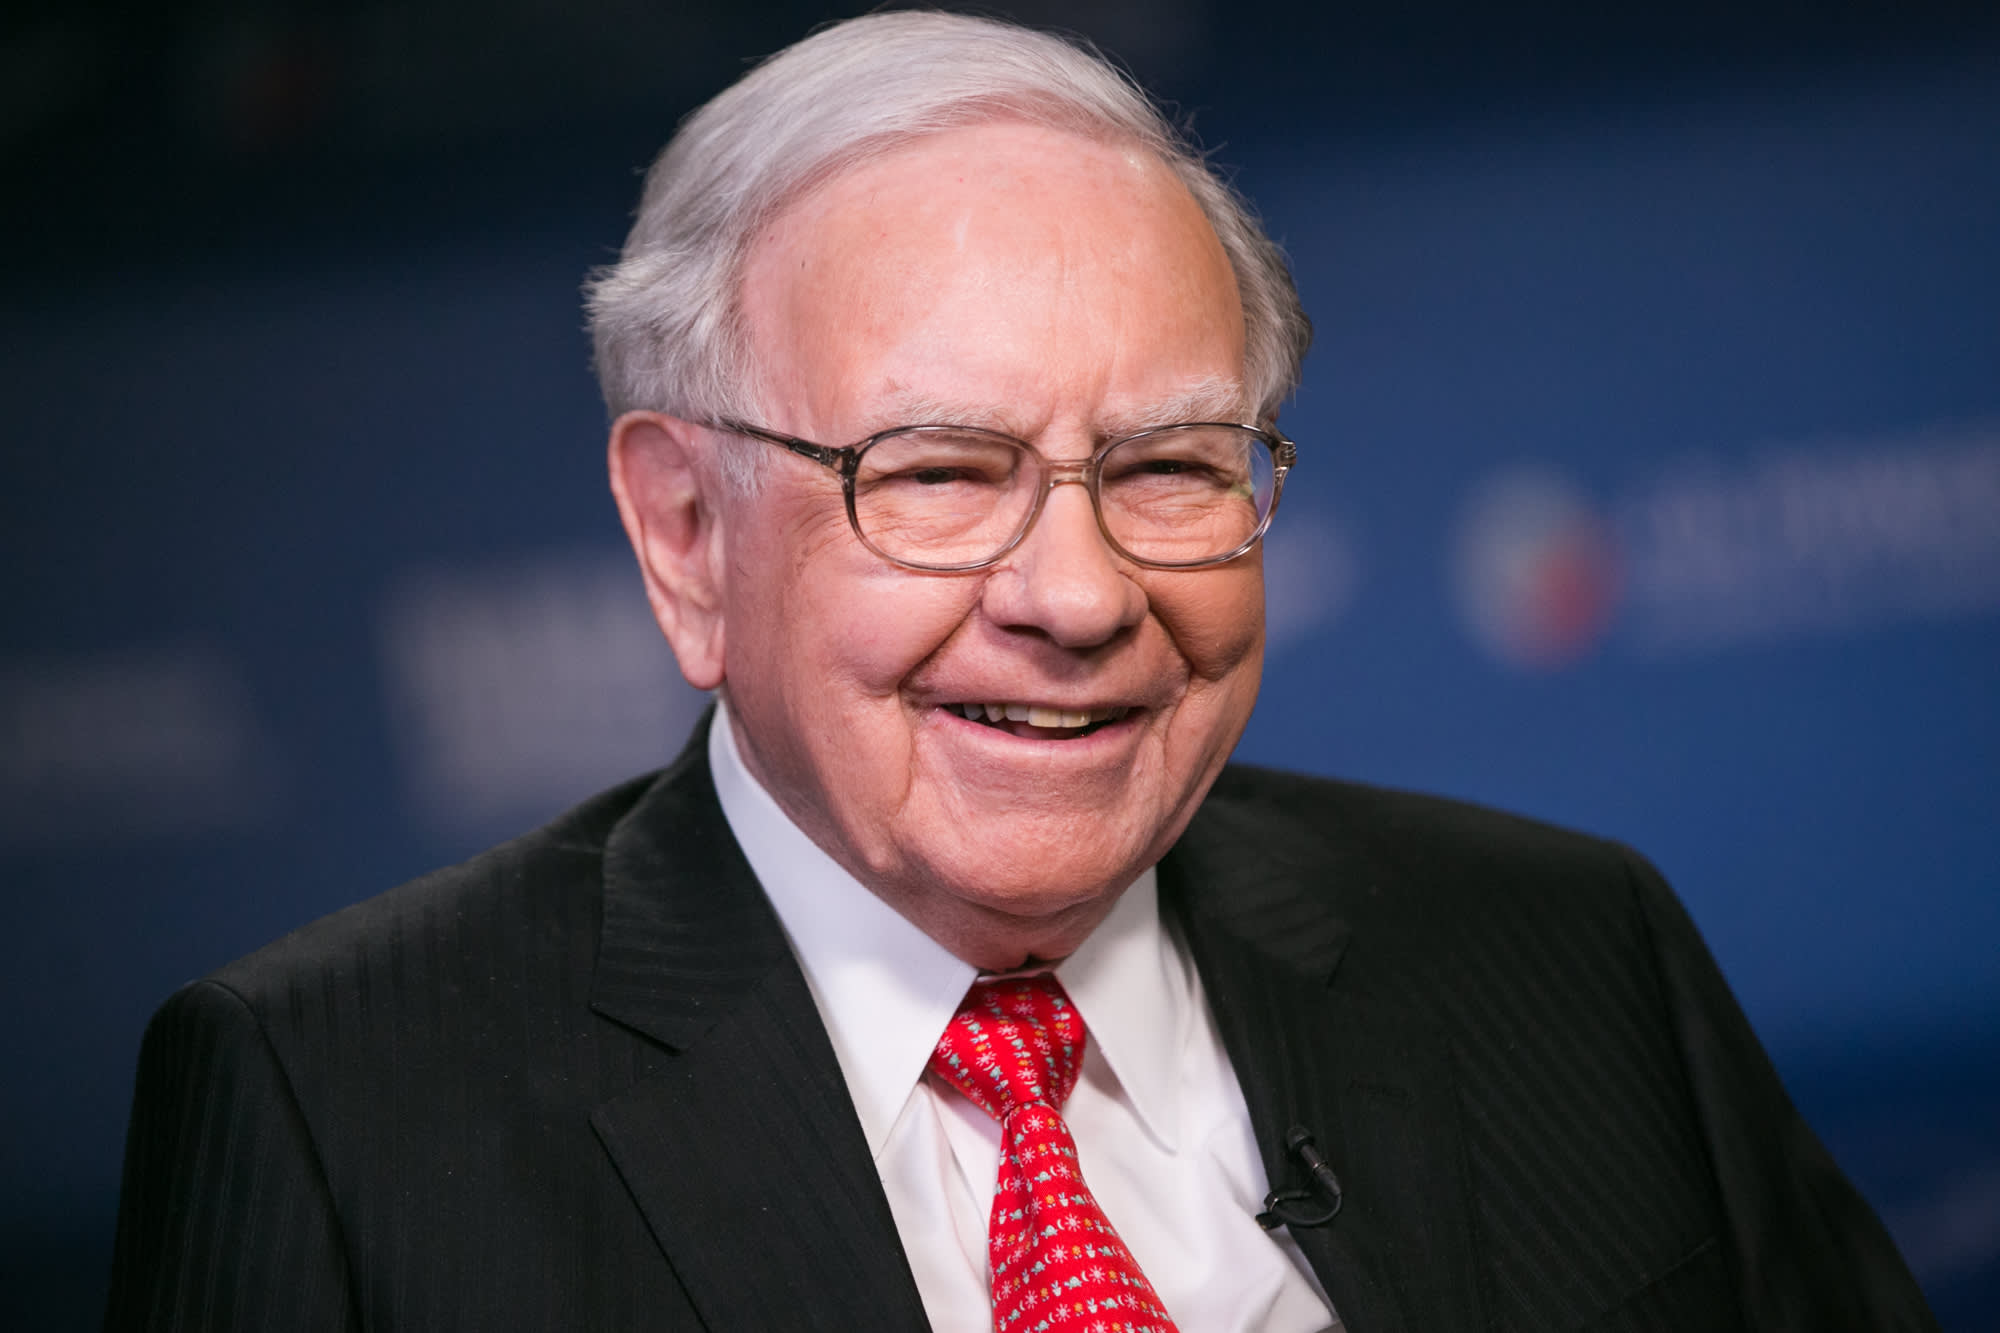 Warren Buffett's key tip for success: Read 500 pages a day